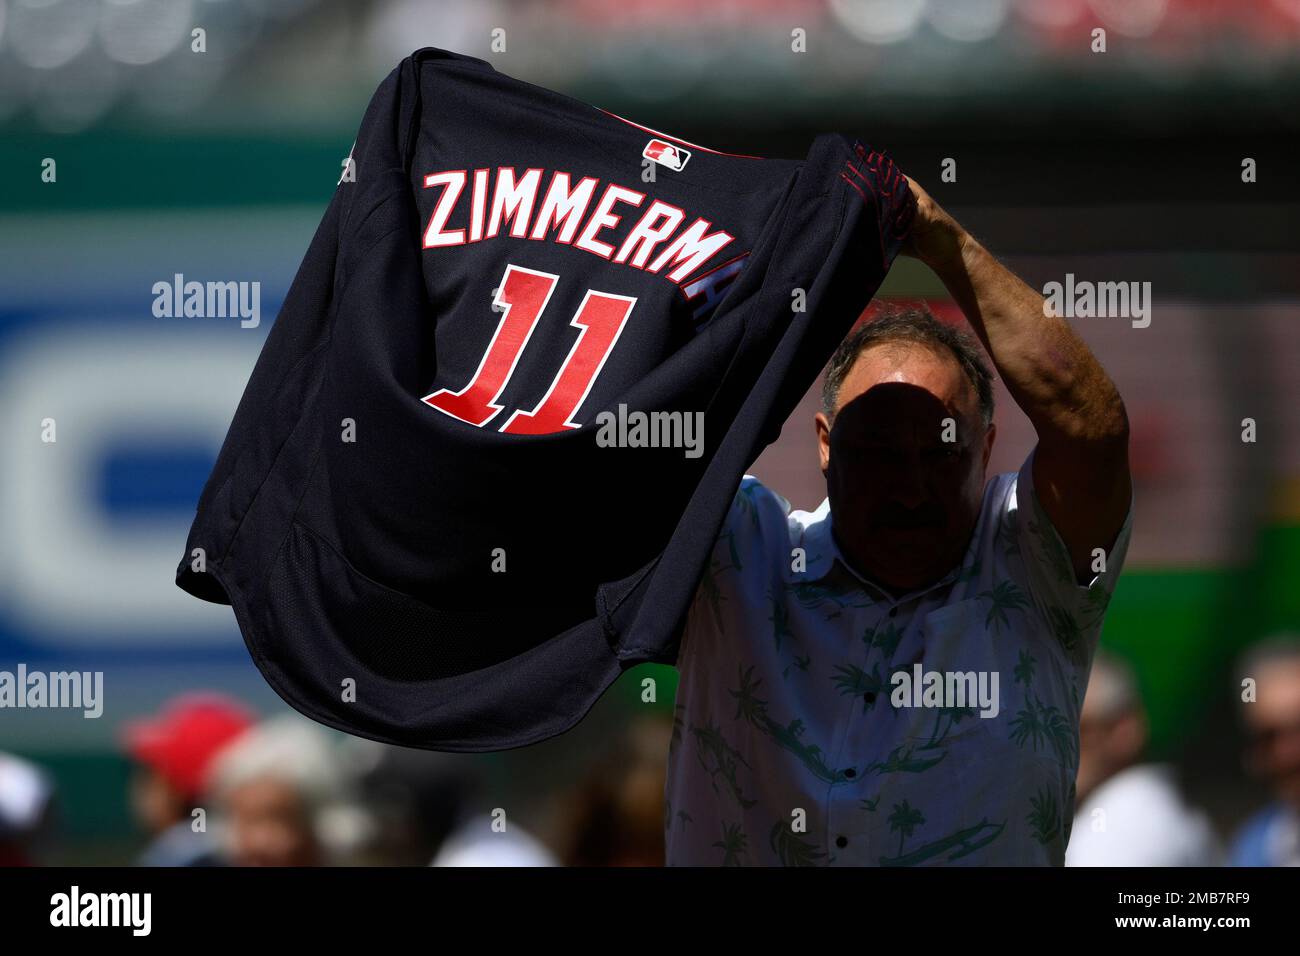 Keith Zimmerman, father of former Washington Nationals baseball player Ryan  Zimmerman, holds up Ryan's jersey at a jersey retirement ceremony before a  baseball game between the Nationals and the Philadelphia Phillies, Saturday